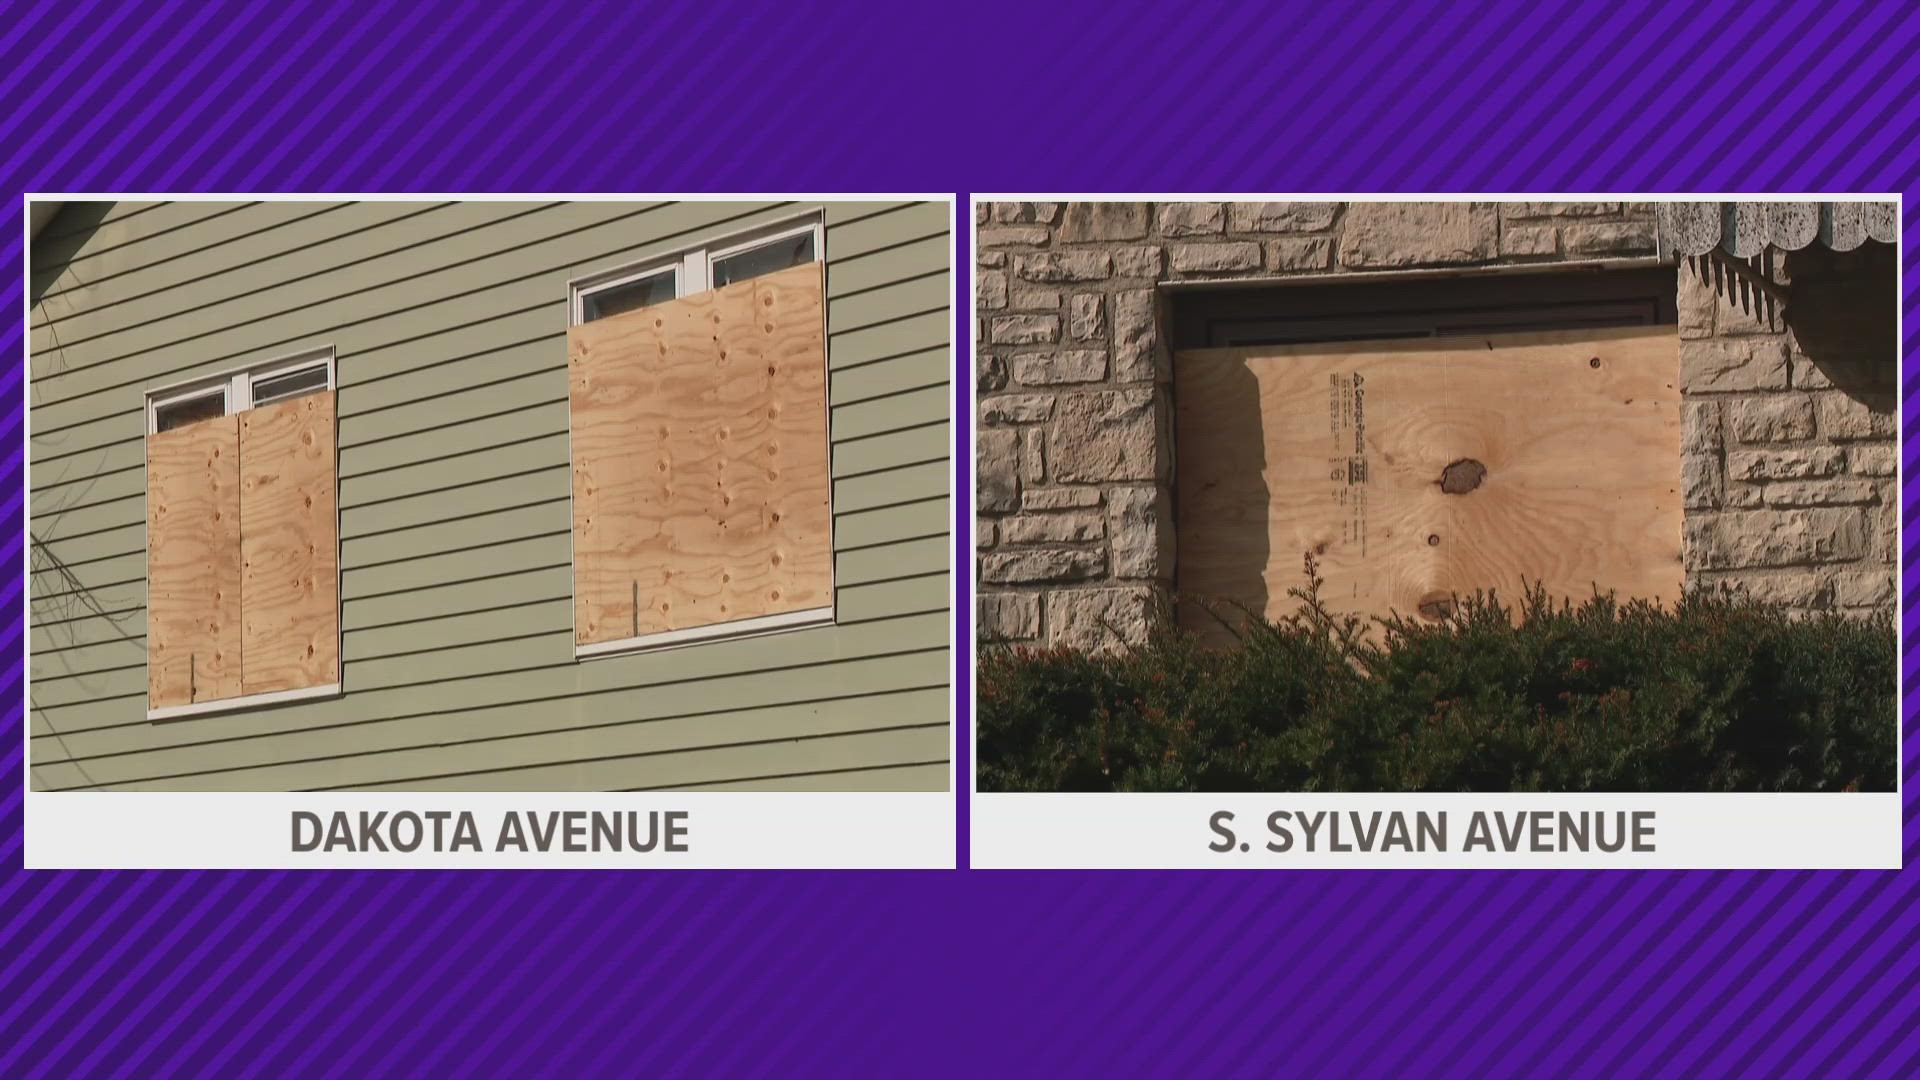 Both houses have been boarded up after officers with the Columbus Division of Police responded to numerous calls of drug dealing.